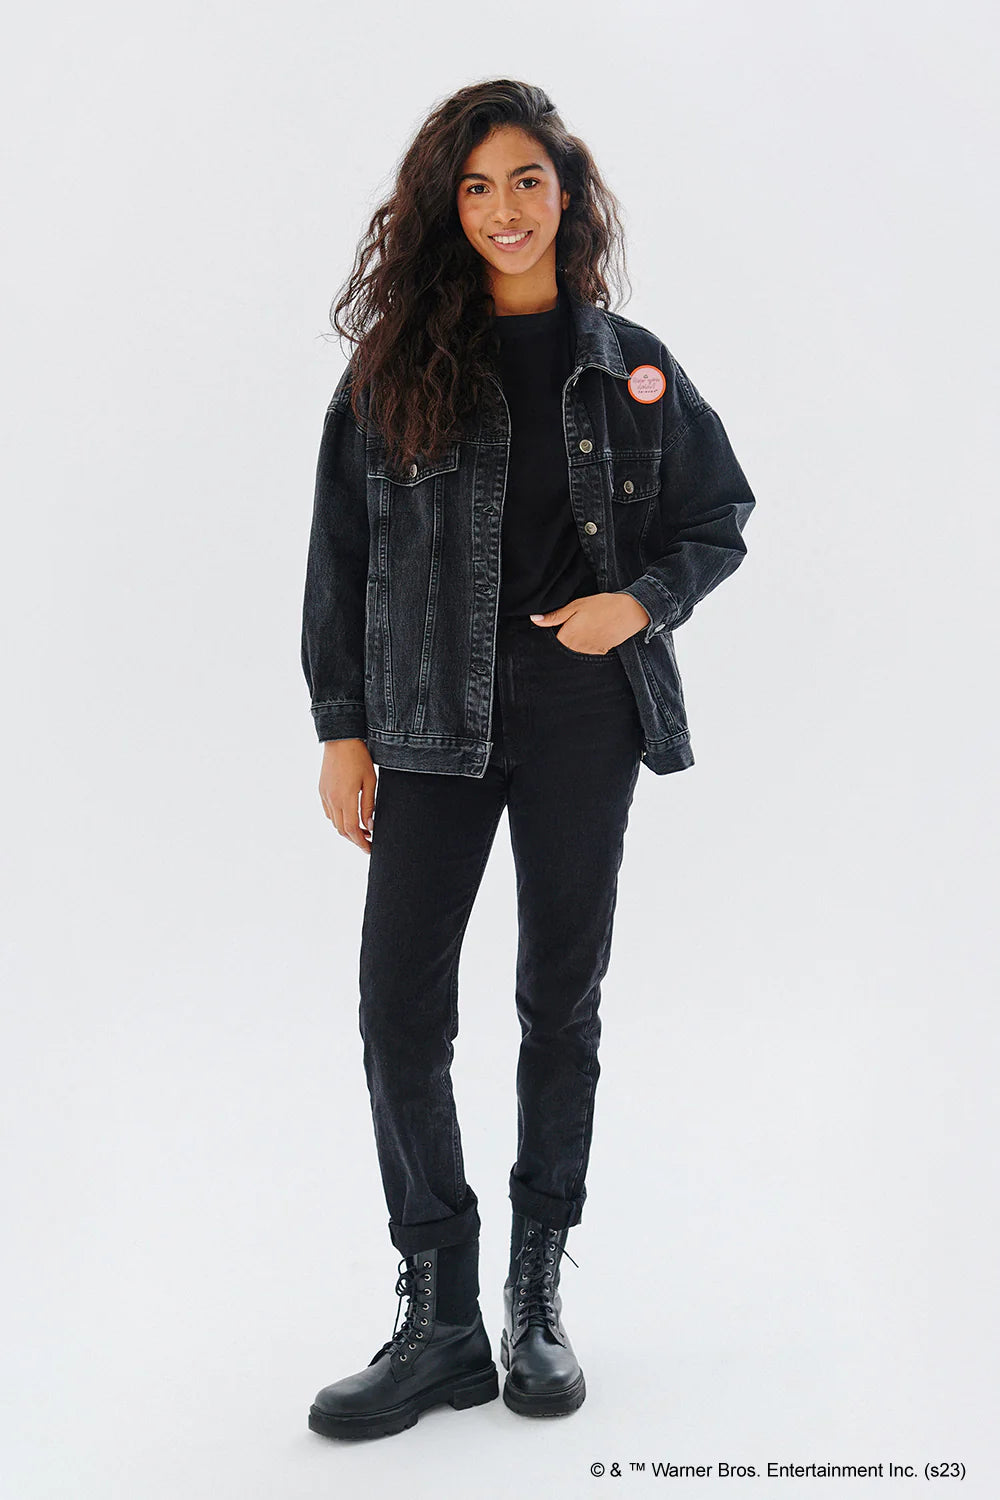 Expressive Black Denim Jacket Outfit Womens - YouTube